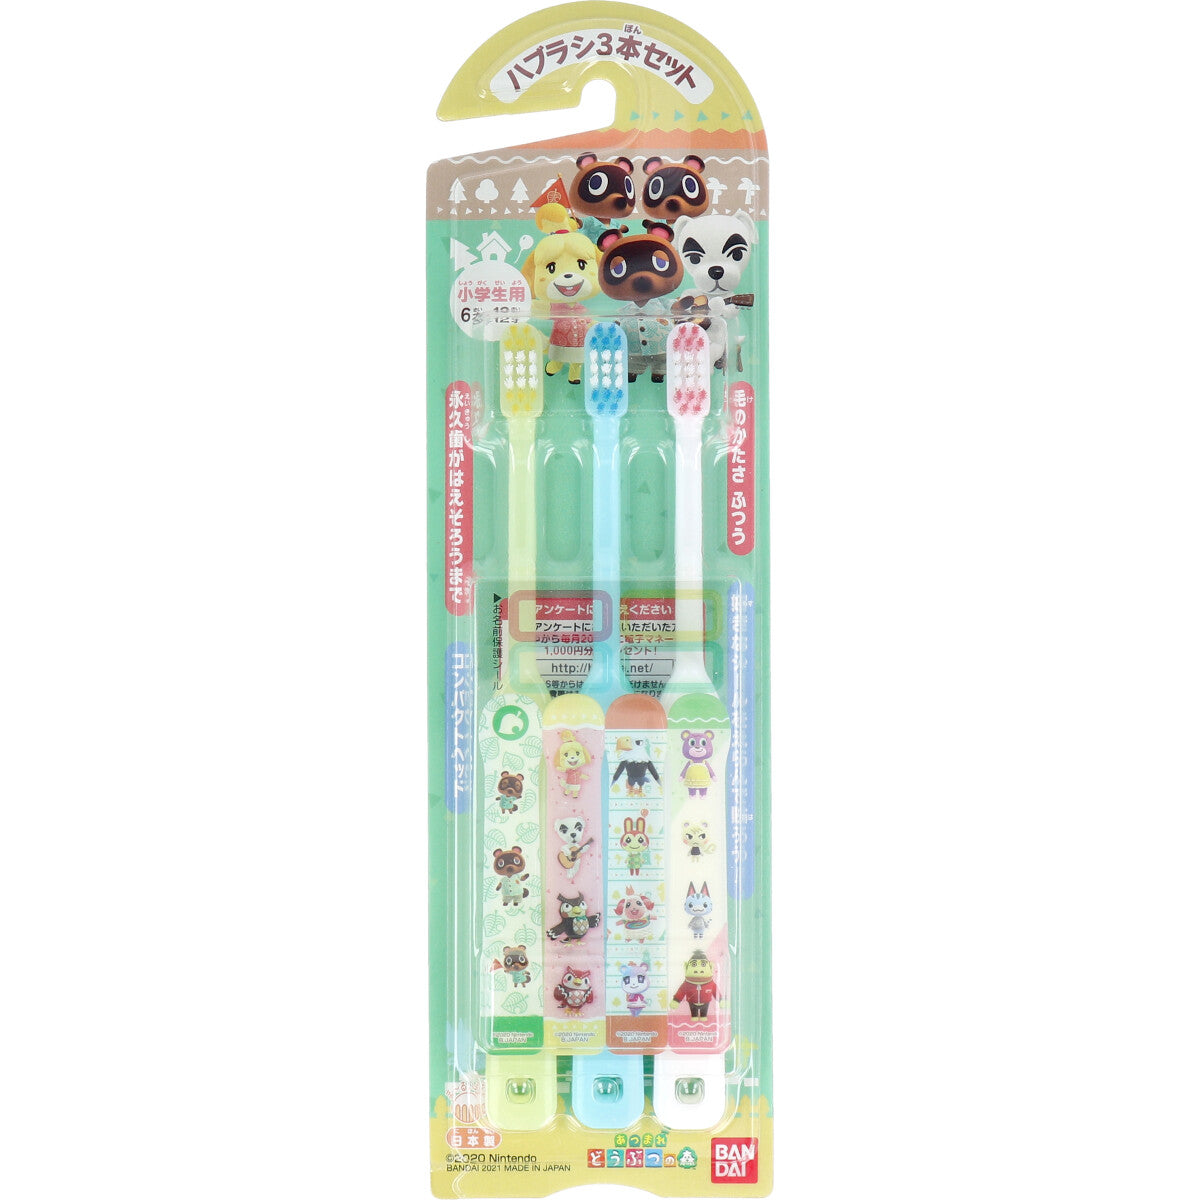 Made in Japan, learning toothbrushes, toddler toothbrushes, toddler toothbrushes, adult toothbrushes, many styles to choose from, each style is shipped randomly.